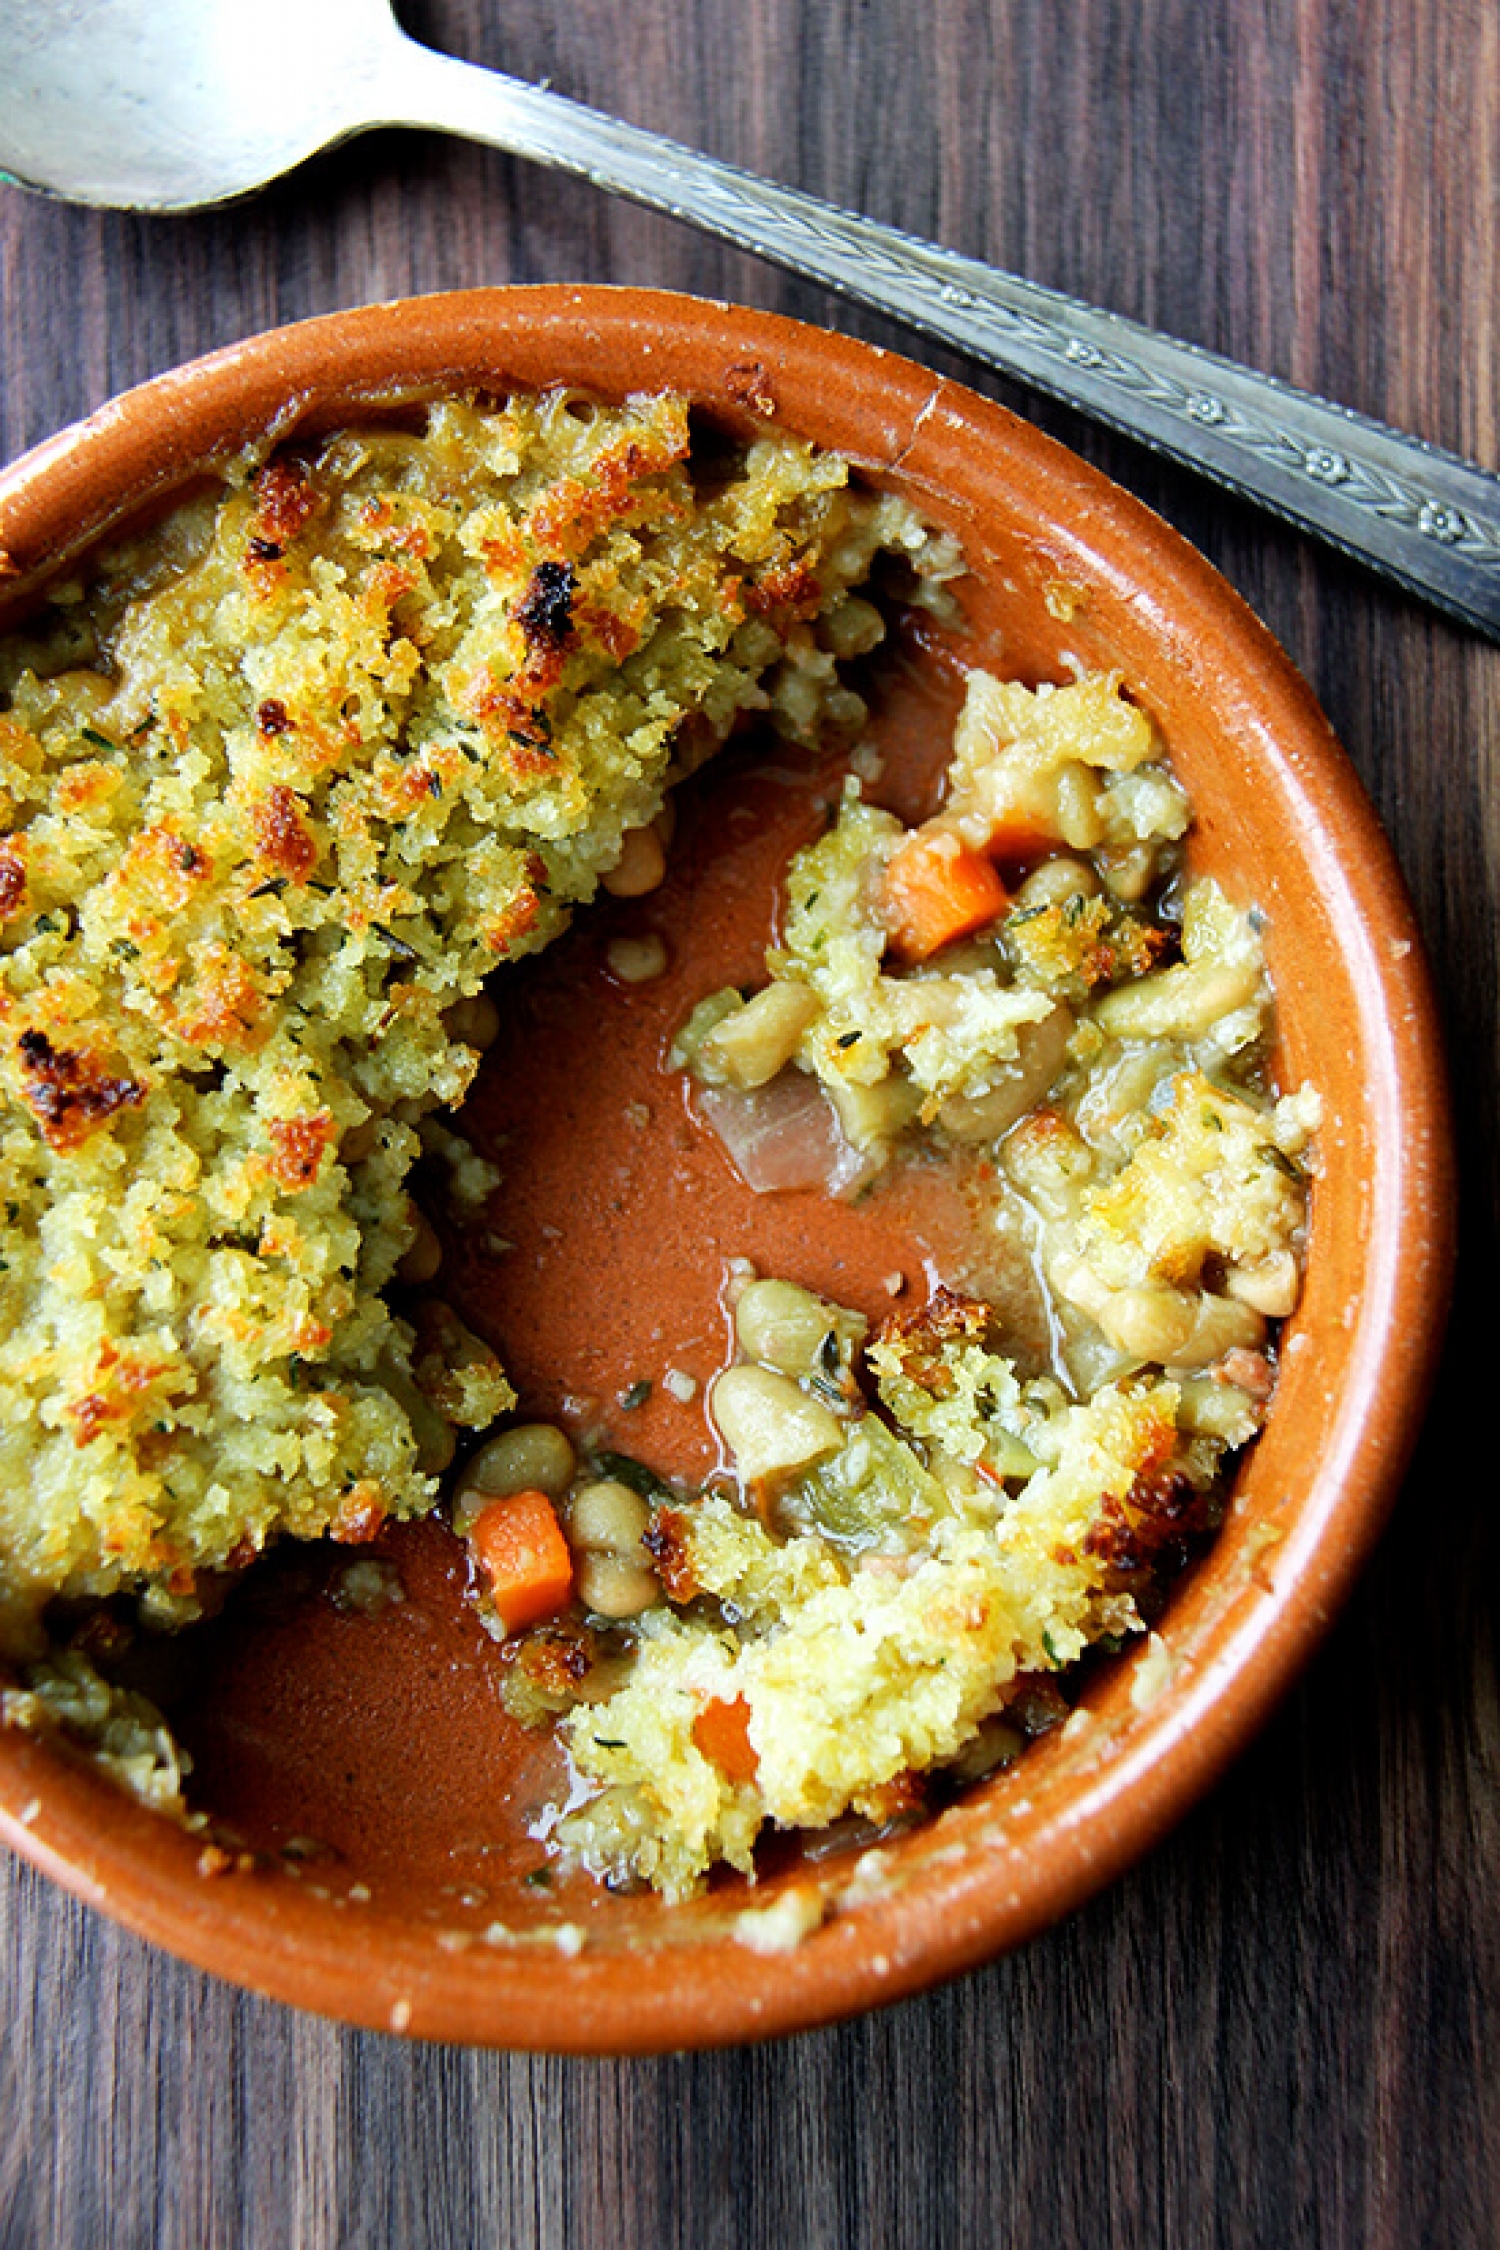 <p>Combine French flageolet beans with diced veggies and bacon to achieve this wholesome, hearty slow-cooker dish. Finished off with gratineed breadcrumbs for that perfect crunchy topping, they're a delightful meatless main for any night of the week. <a href="https://alexandracooks.com/2015/01/23/slow-cooker-flageolets-gratineed-also-bread-bowls/" rel="noopener">Get the recipe here.</a></p>